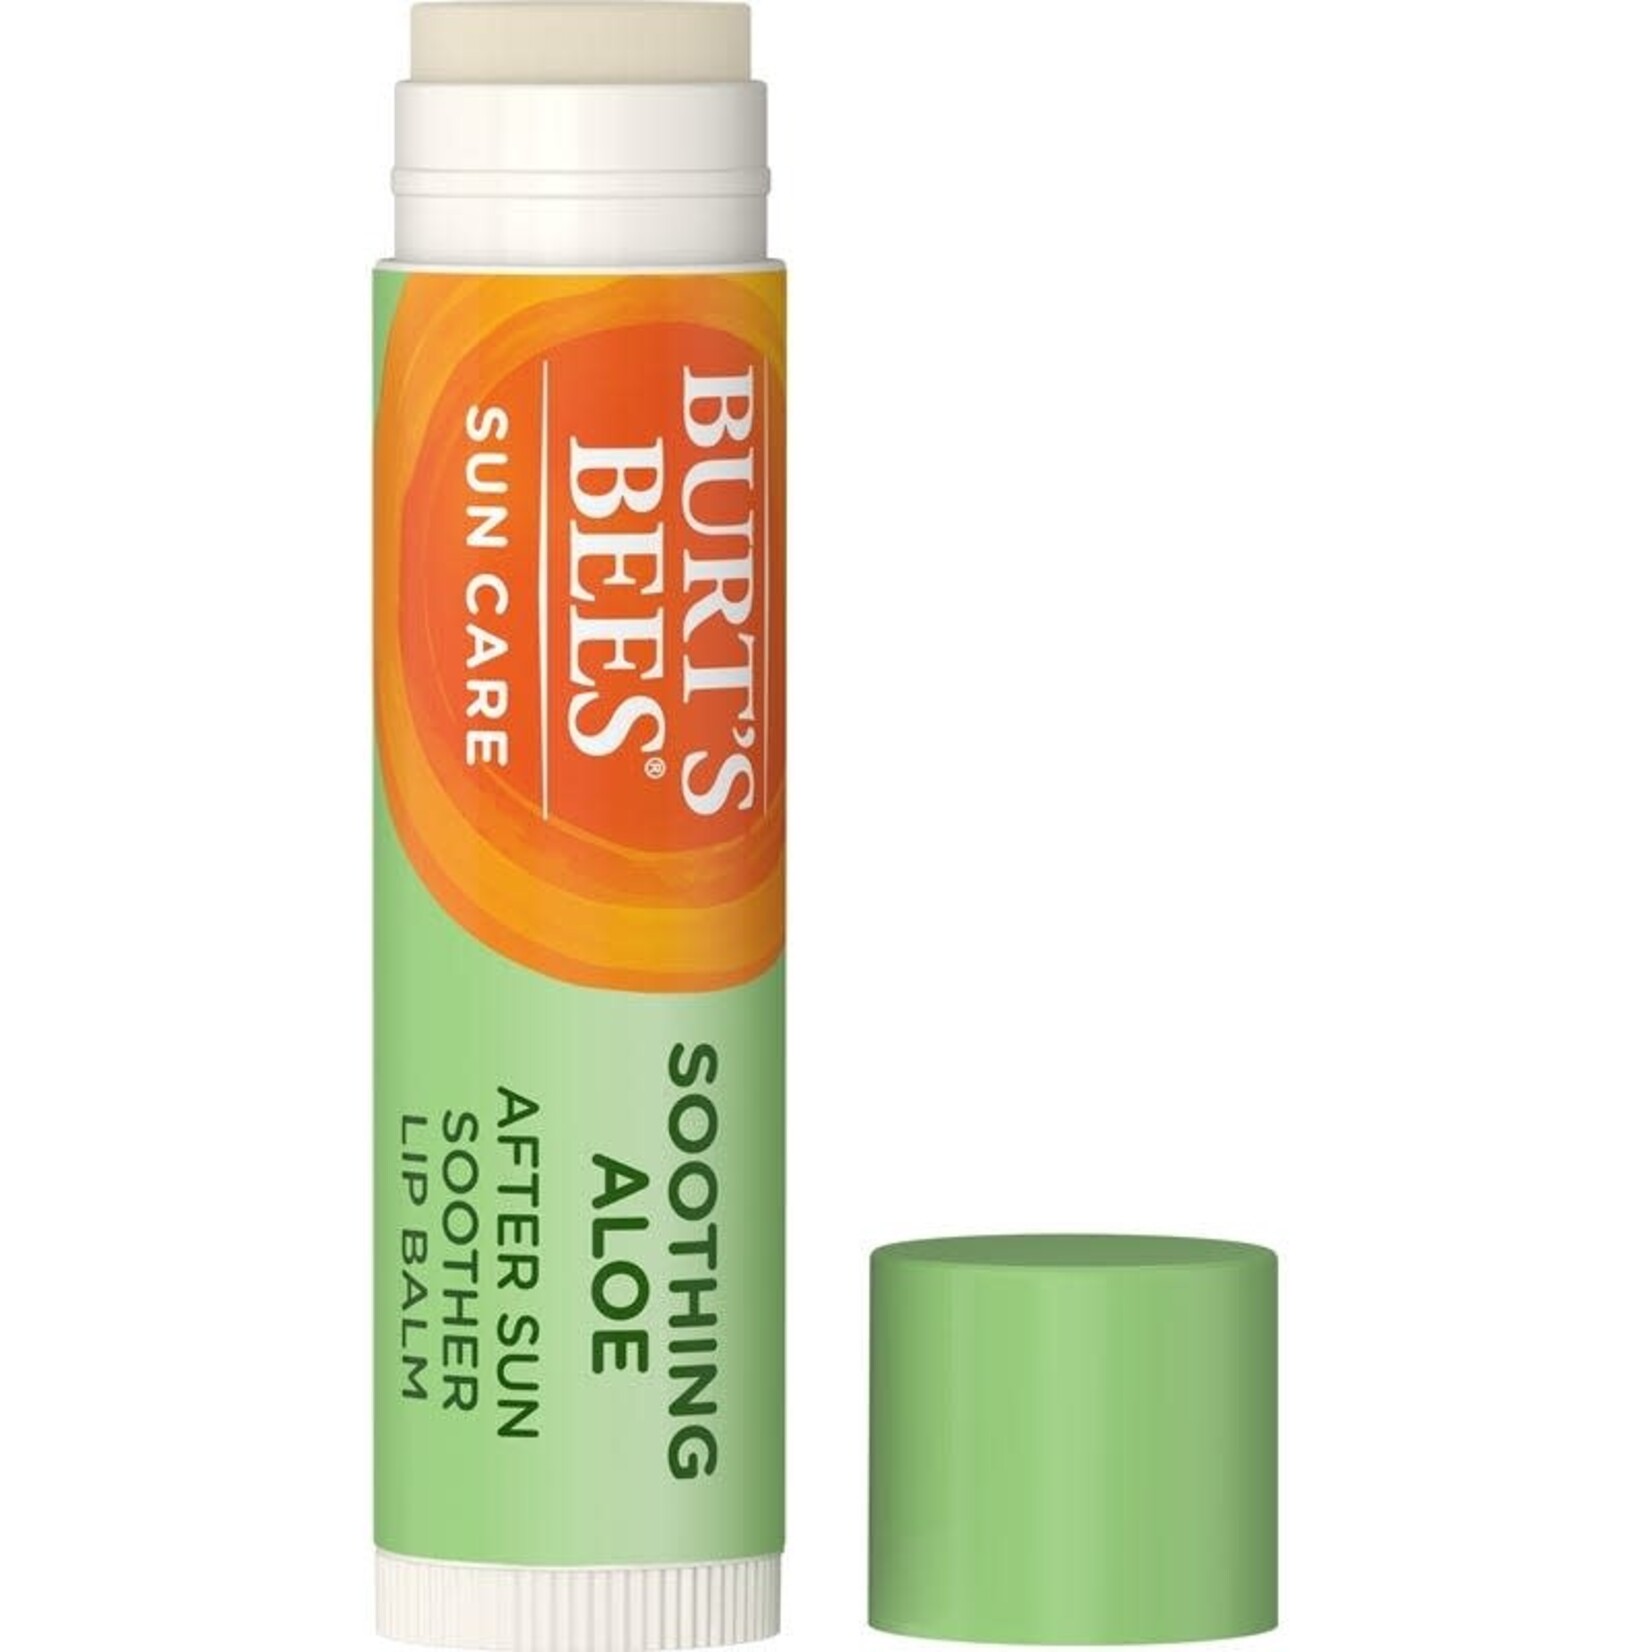 Burt's Bee Burt's Bees Soothing Lip Balm After Sun Soother (Soothing Aloe)